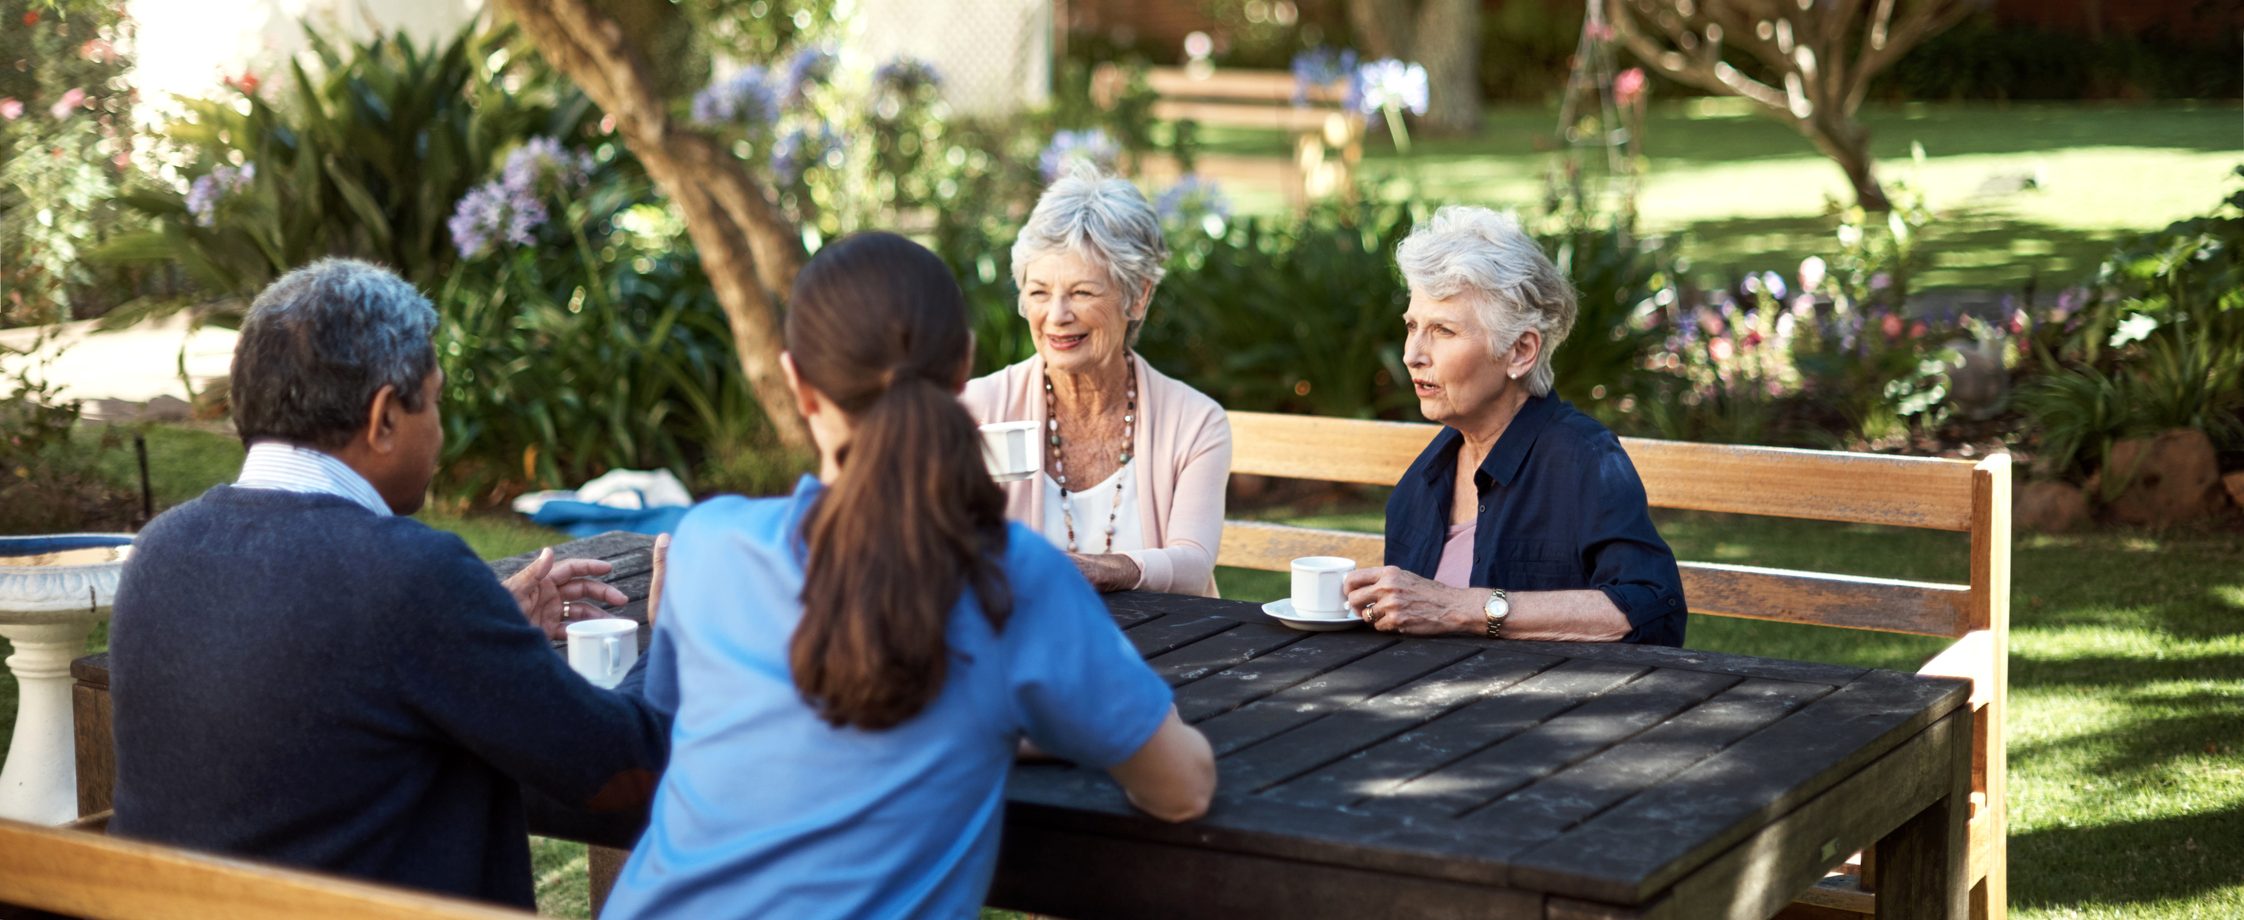 Four people discuss retirement savings tips at a table outside.